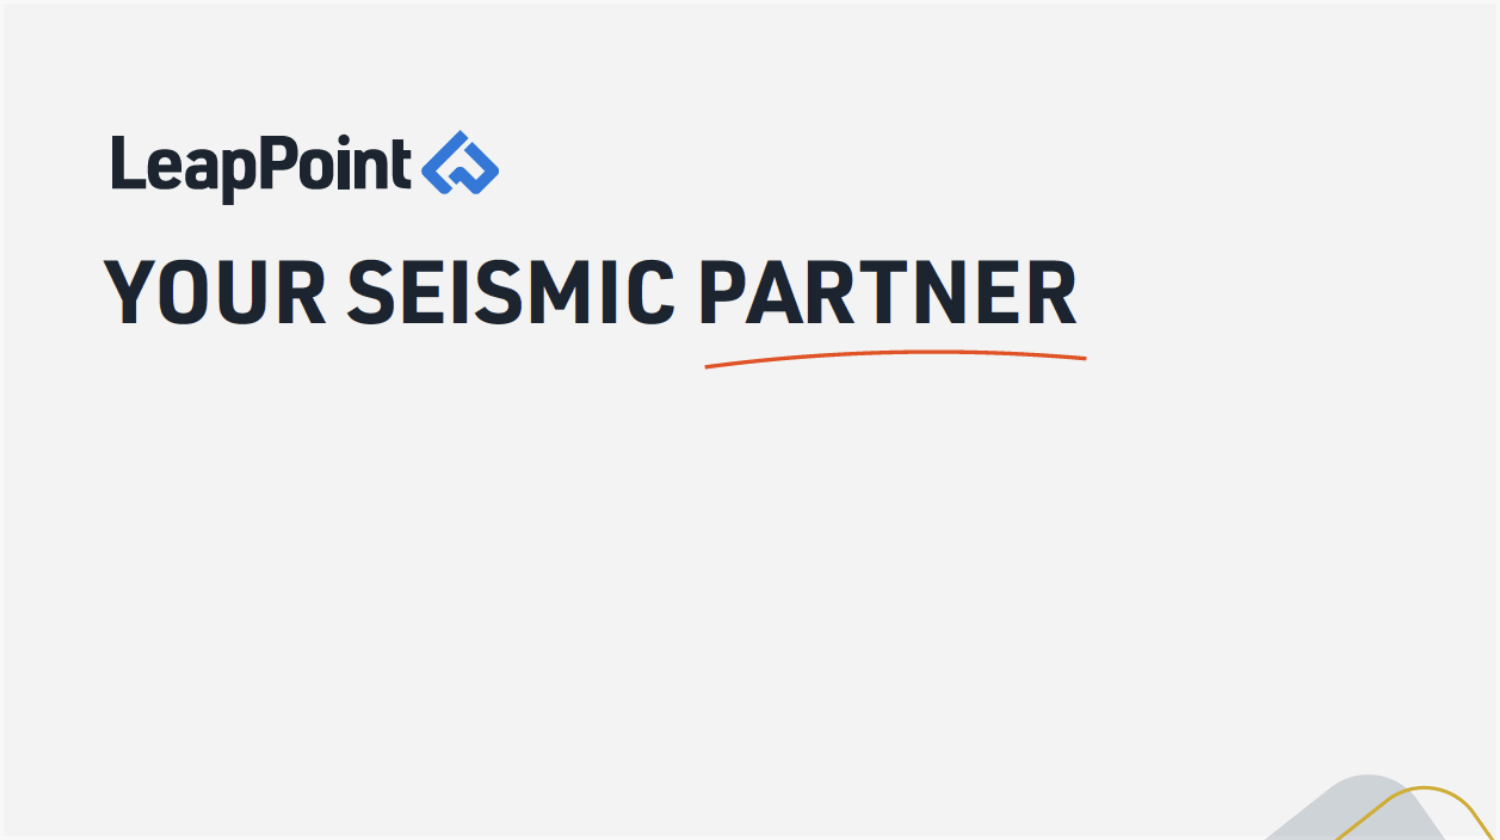 LeapPoint your seismic partner